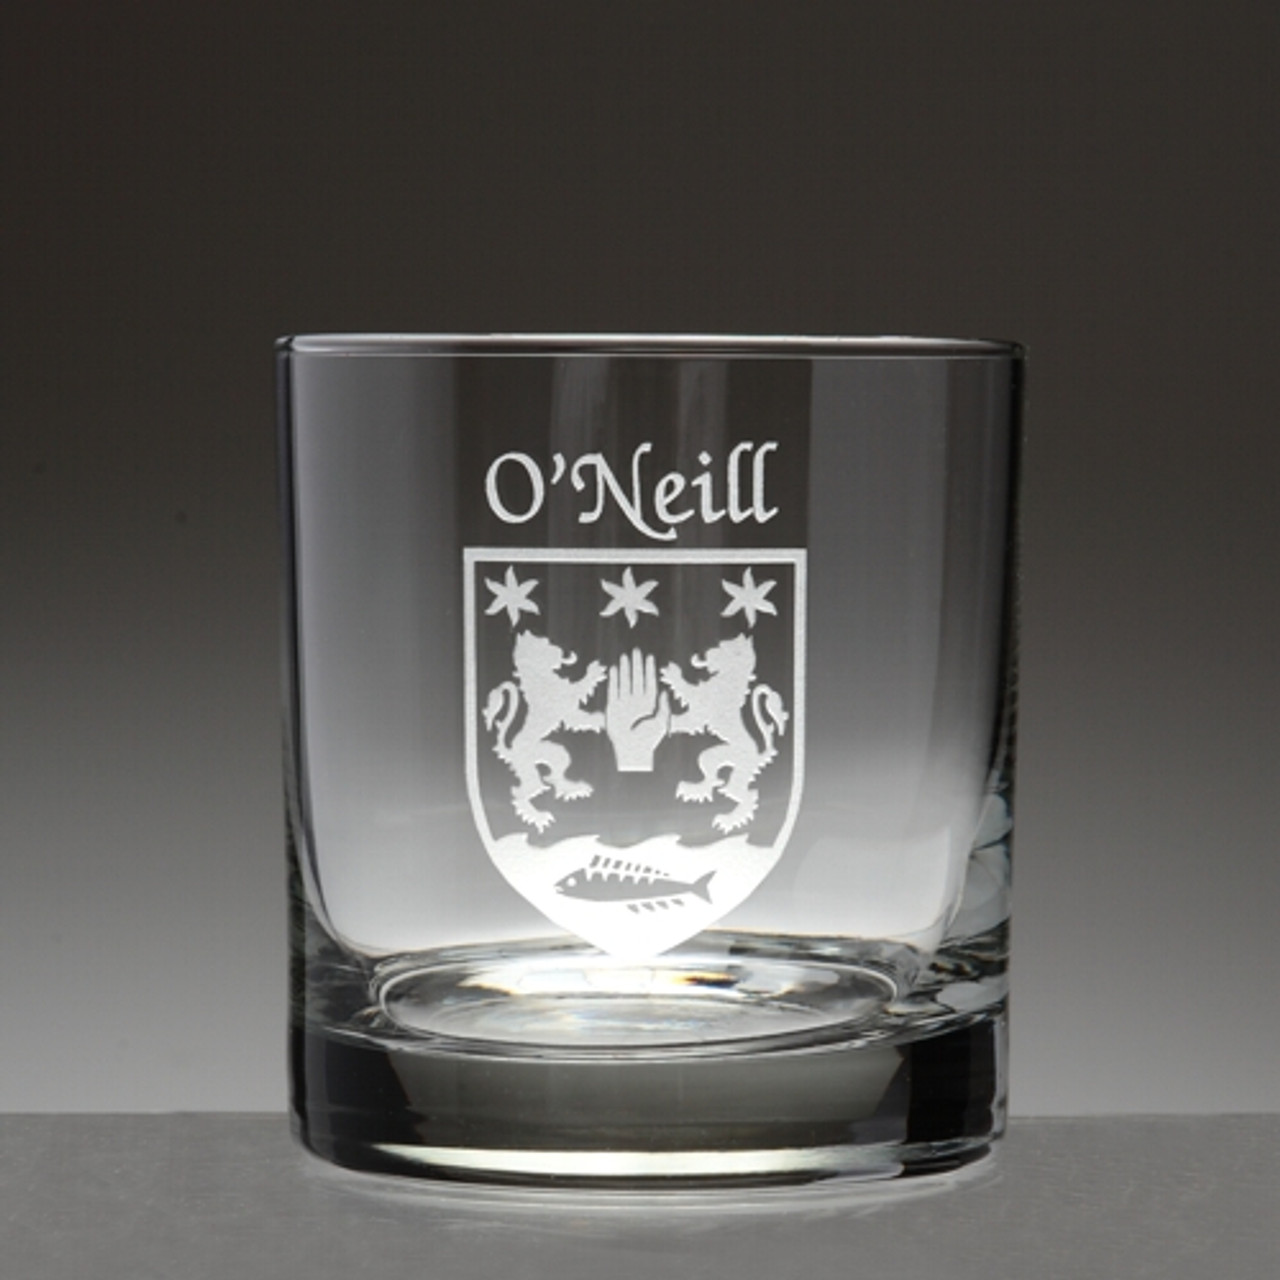 Personalized Coat of Arms Red Wine Glasses - Set of 4 at IrishShop